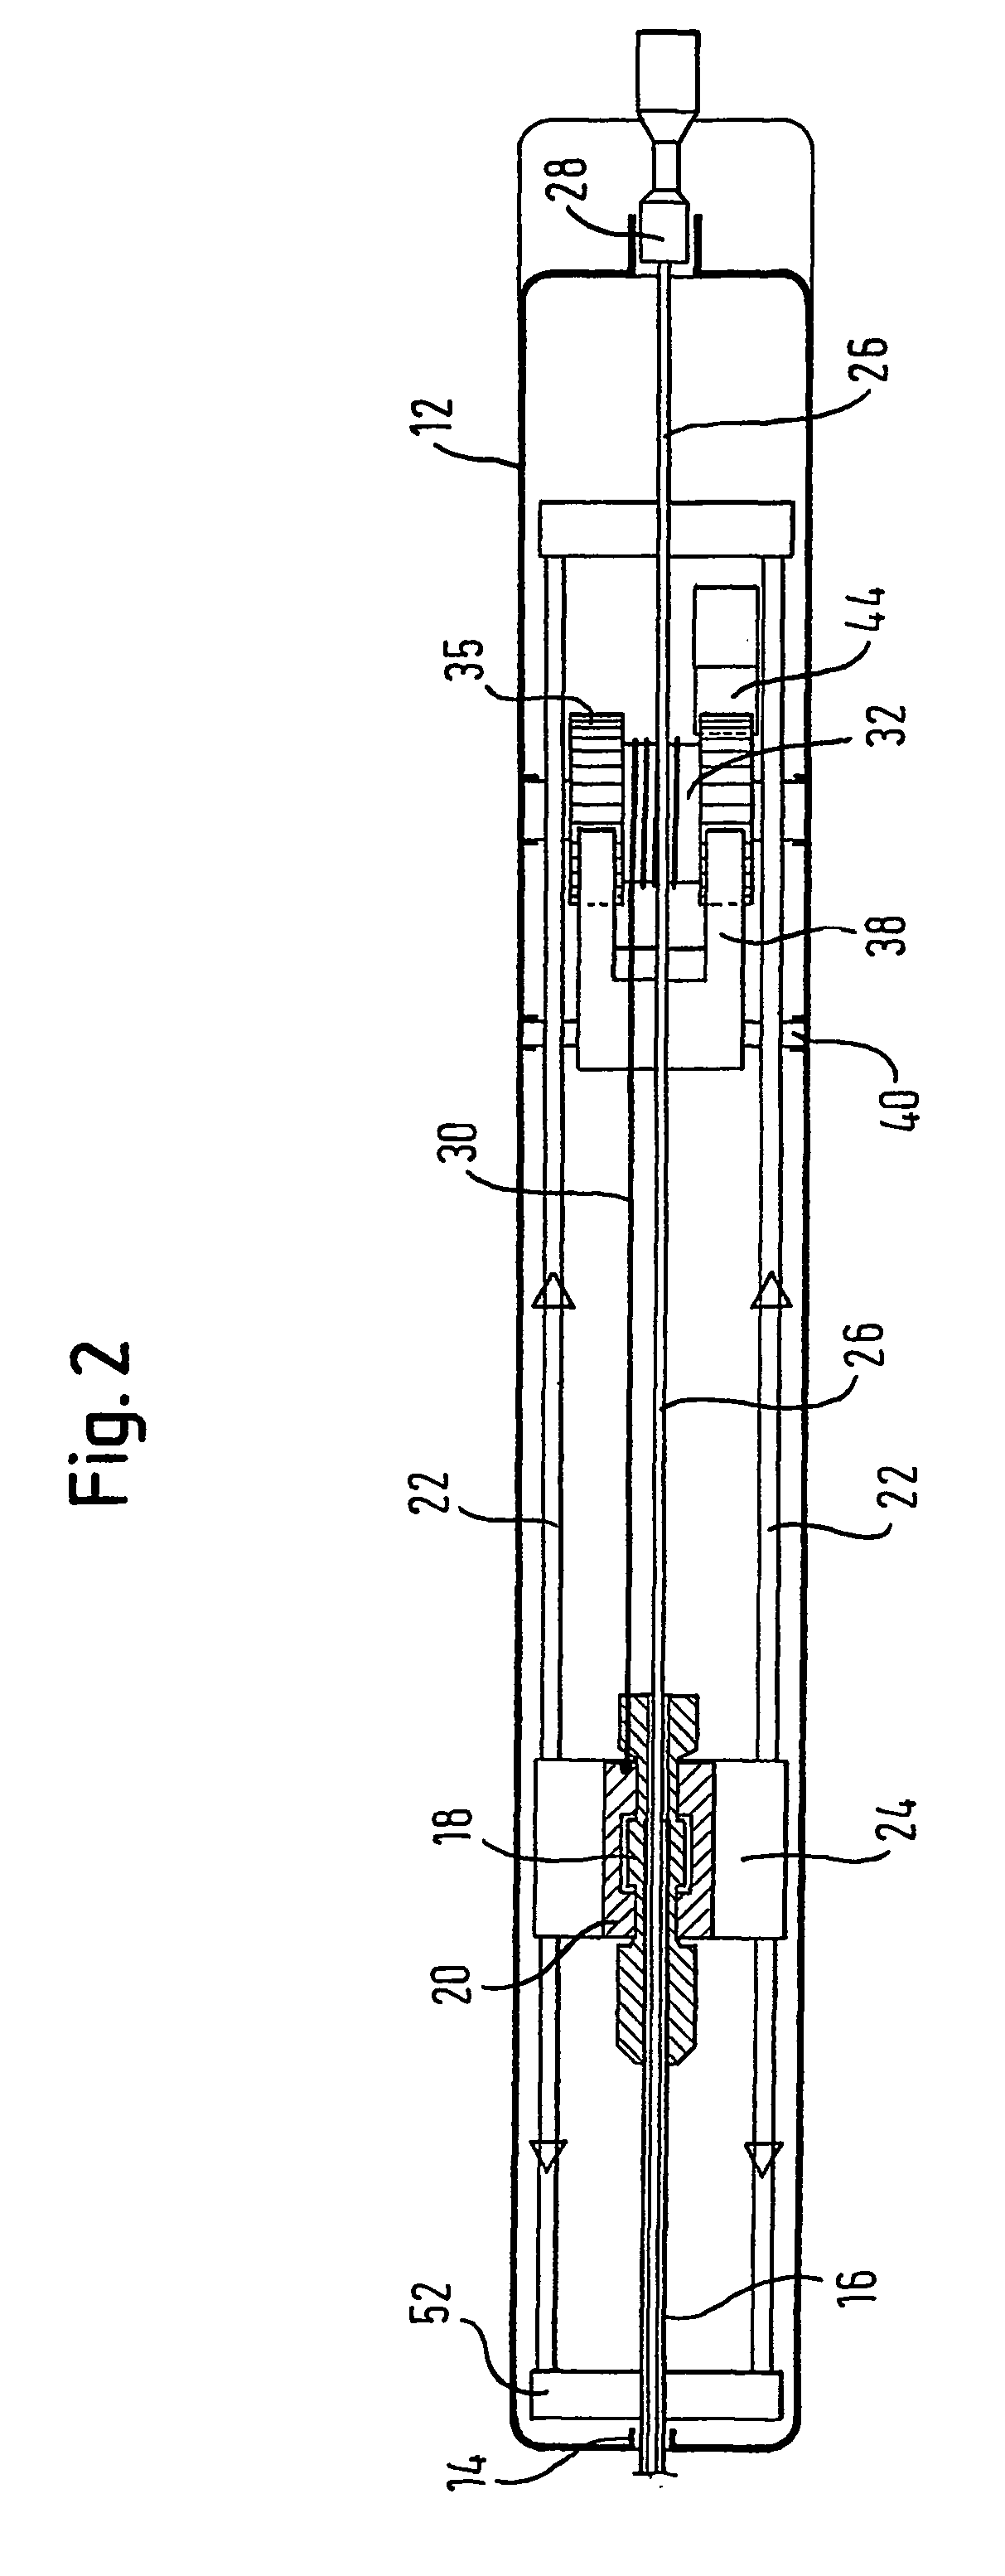 Self-expanding stent delivery device